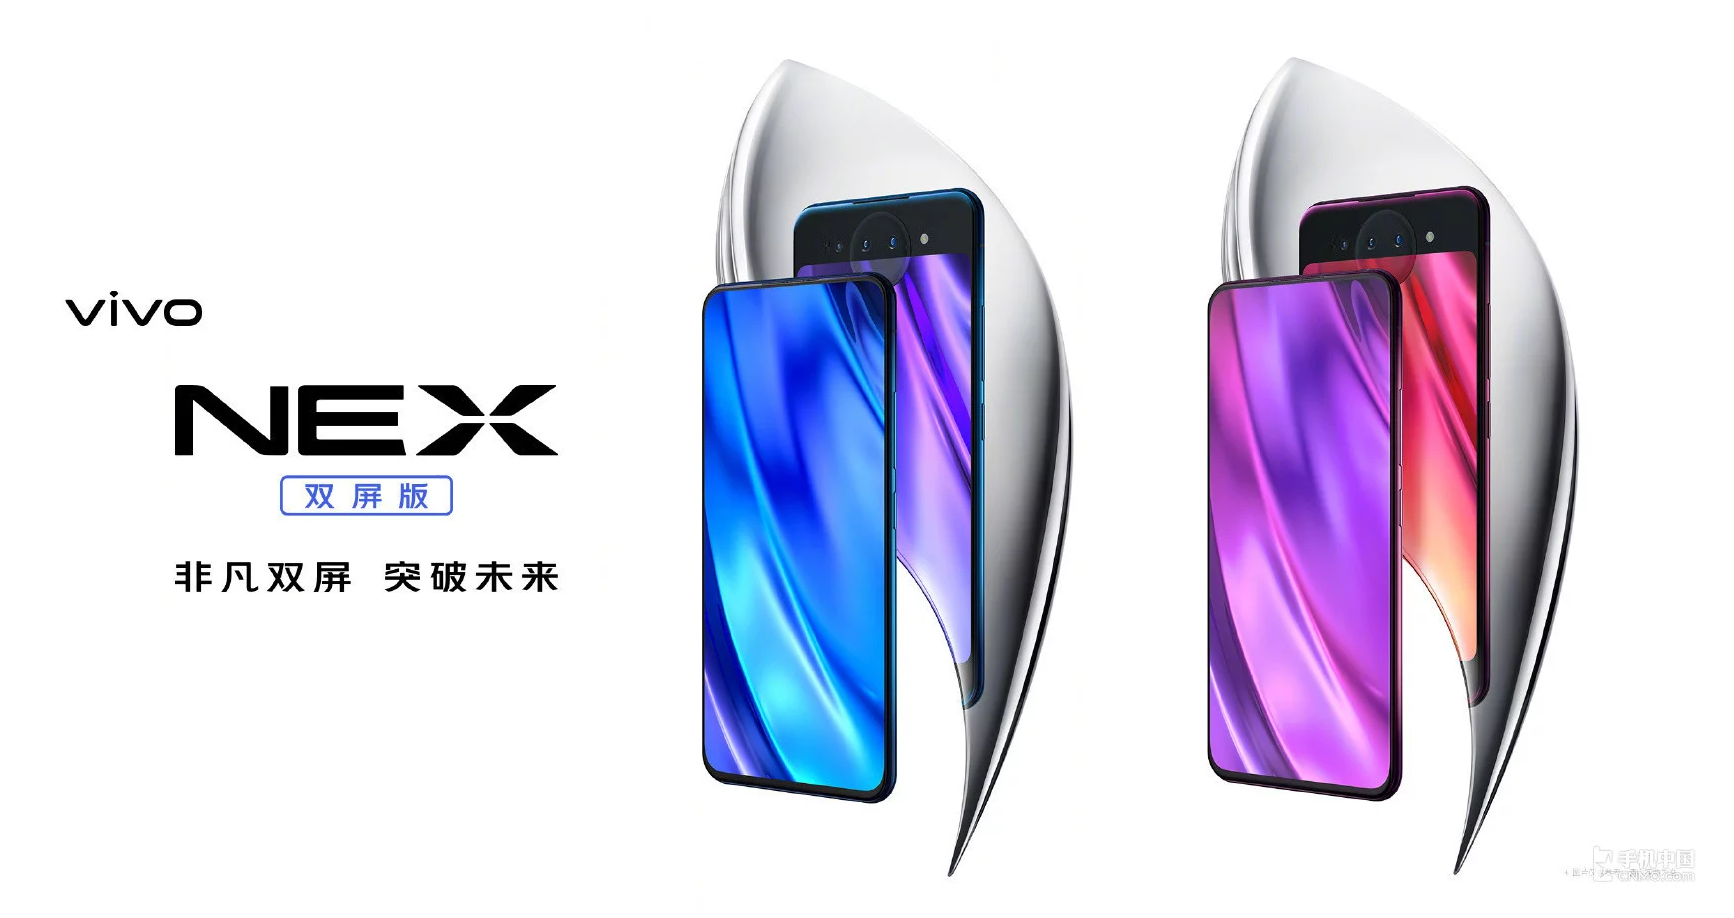 vivo NEX 2 official images released, coming soon on 11 December 2018